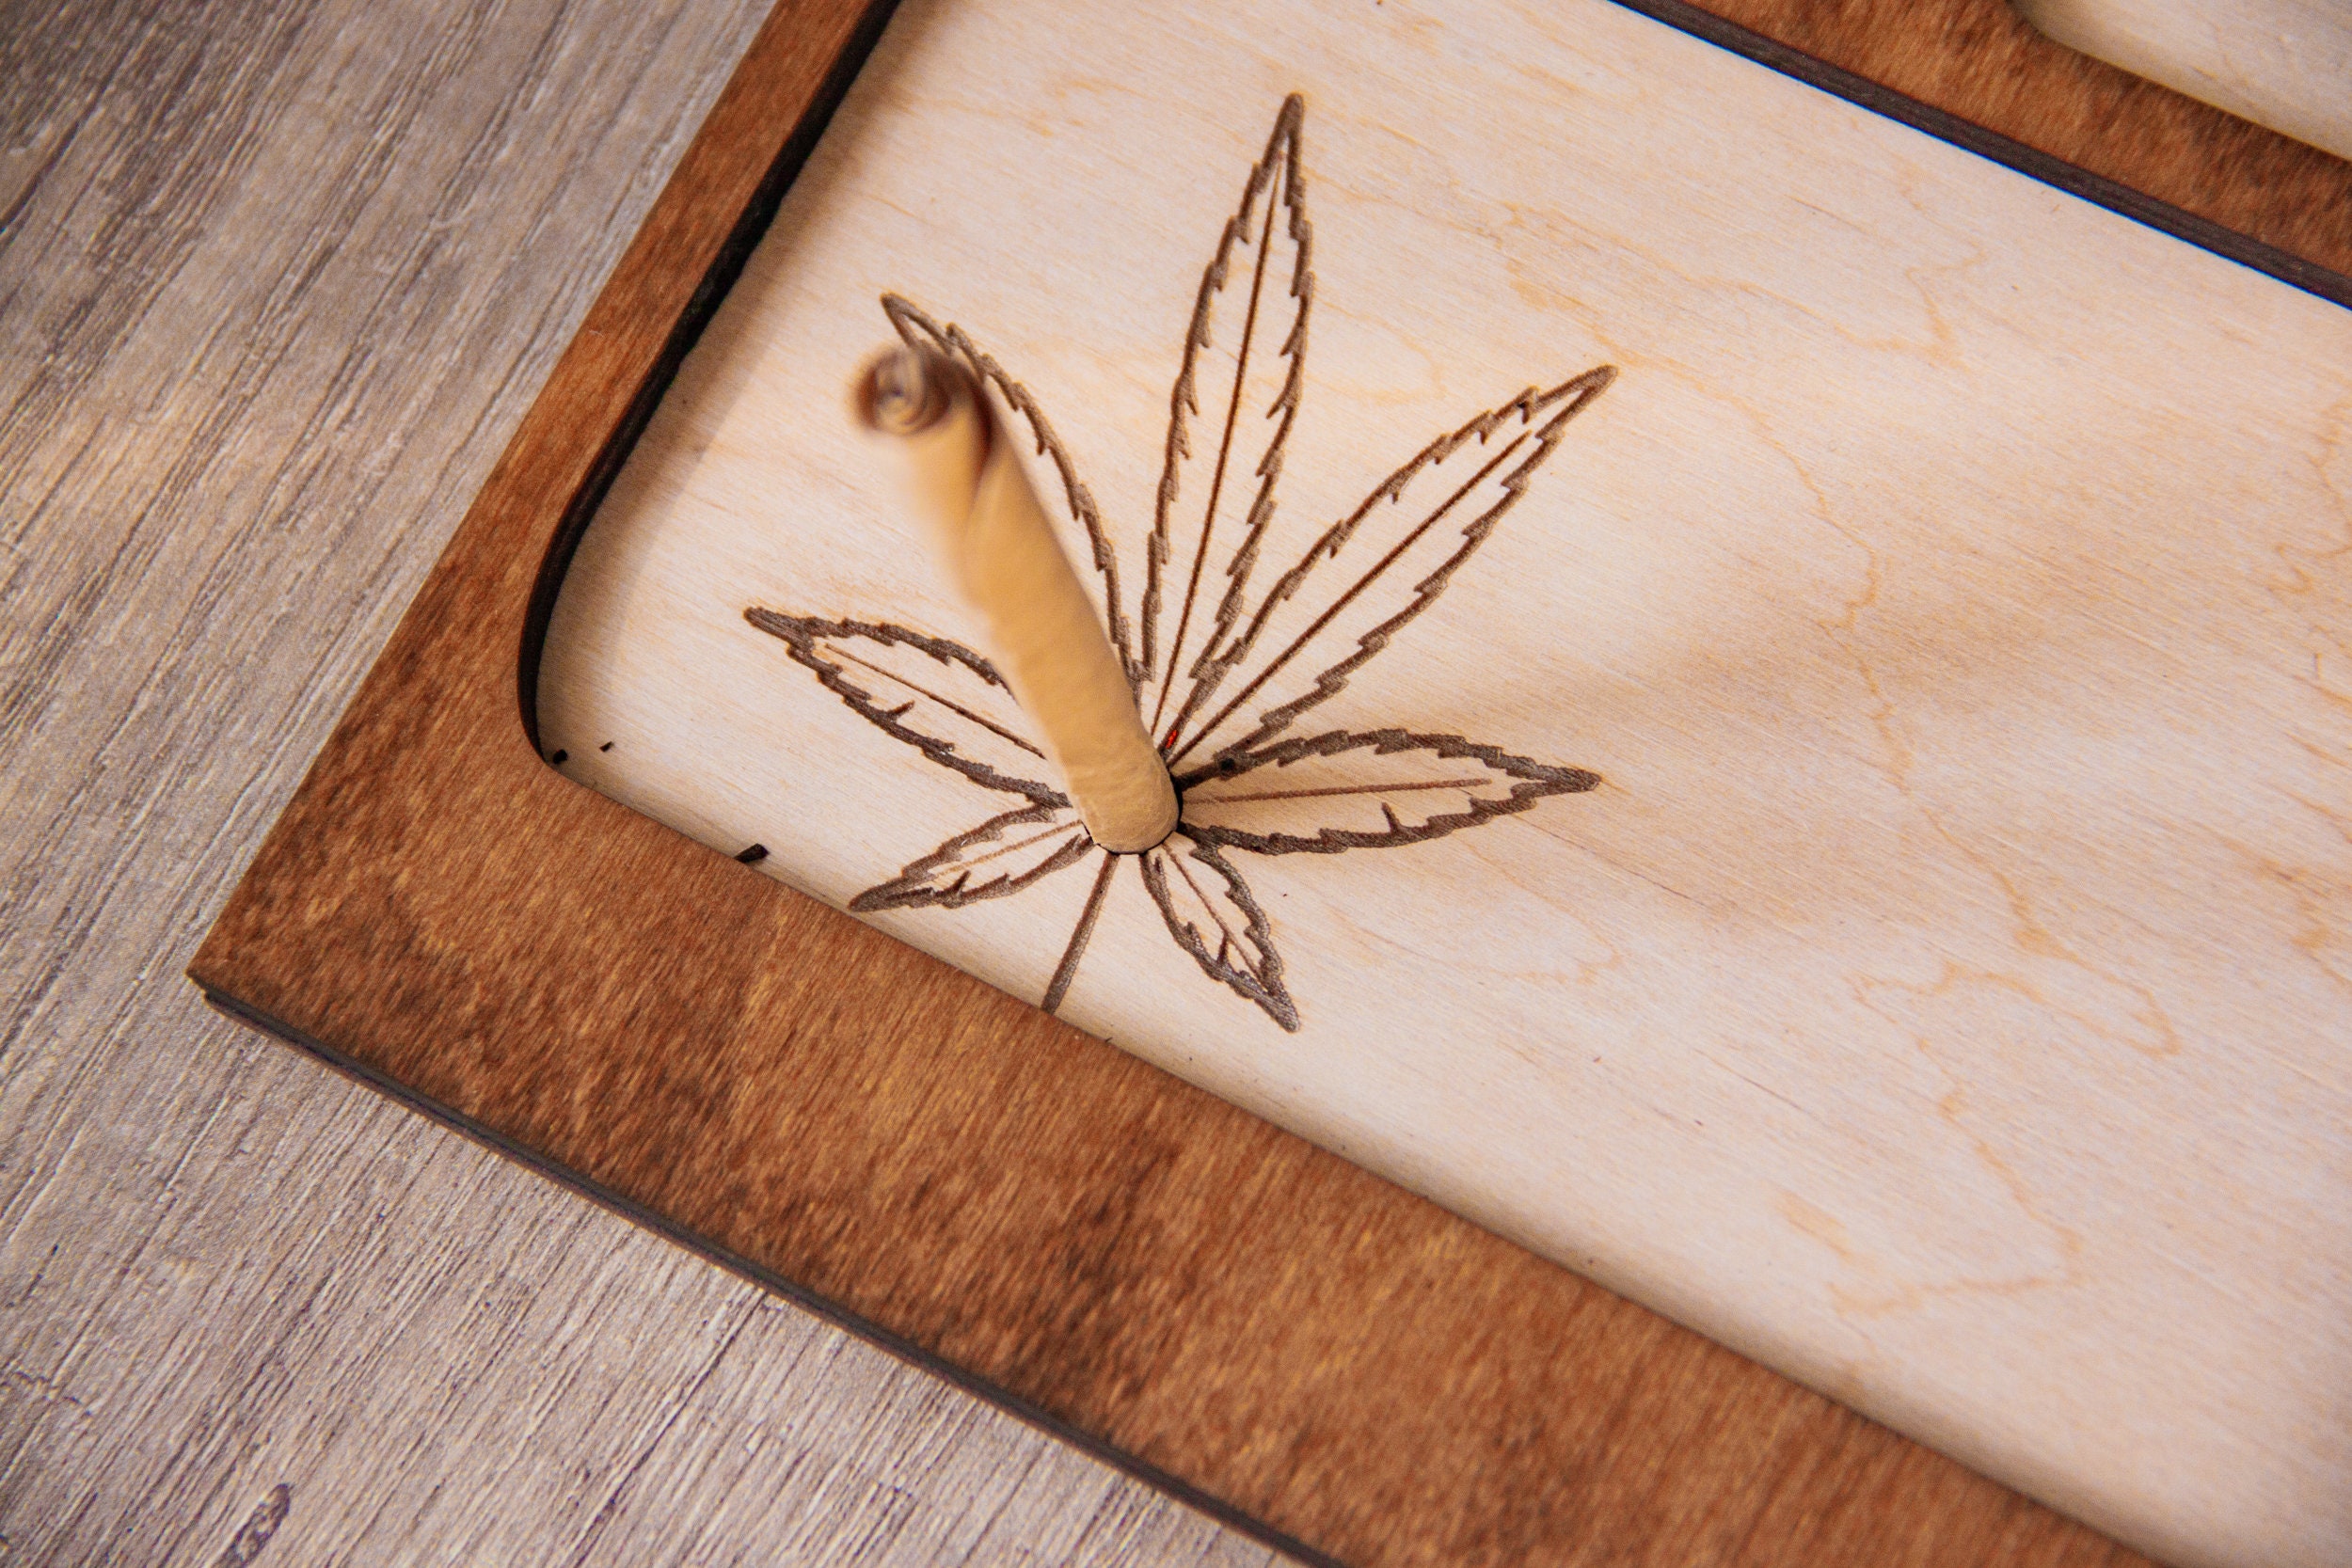 Wood Rolling Tray with Quote Inhale Exhale, Cannabis or Tobacco Tray, Weed  Gift, Marijuana Accessories, Smoker Gift